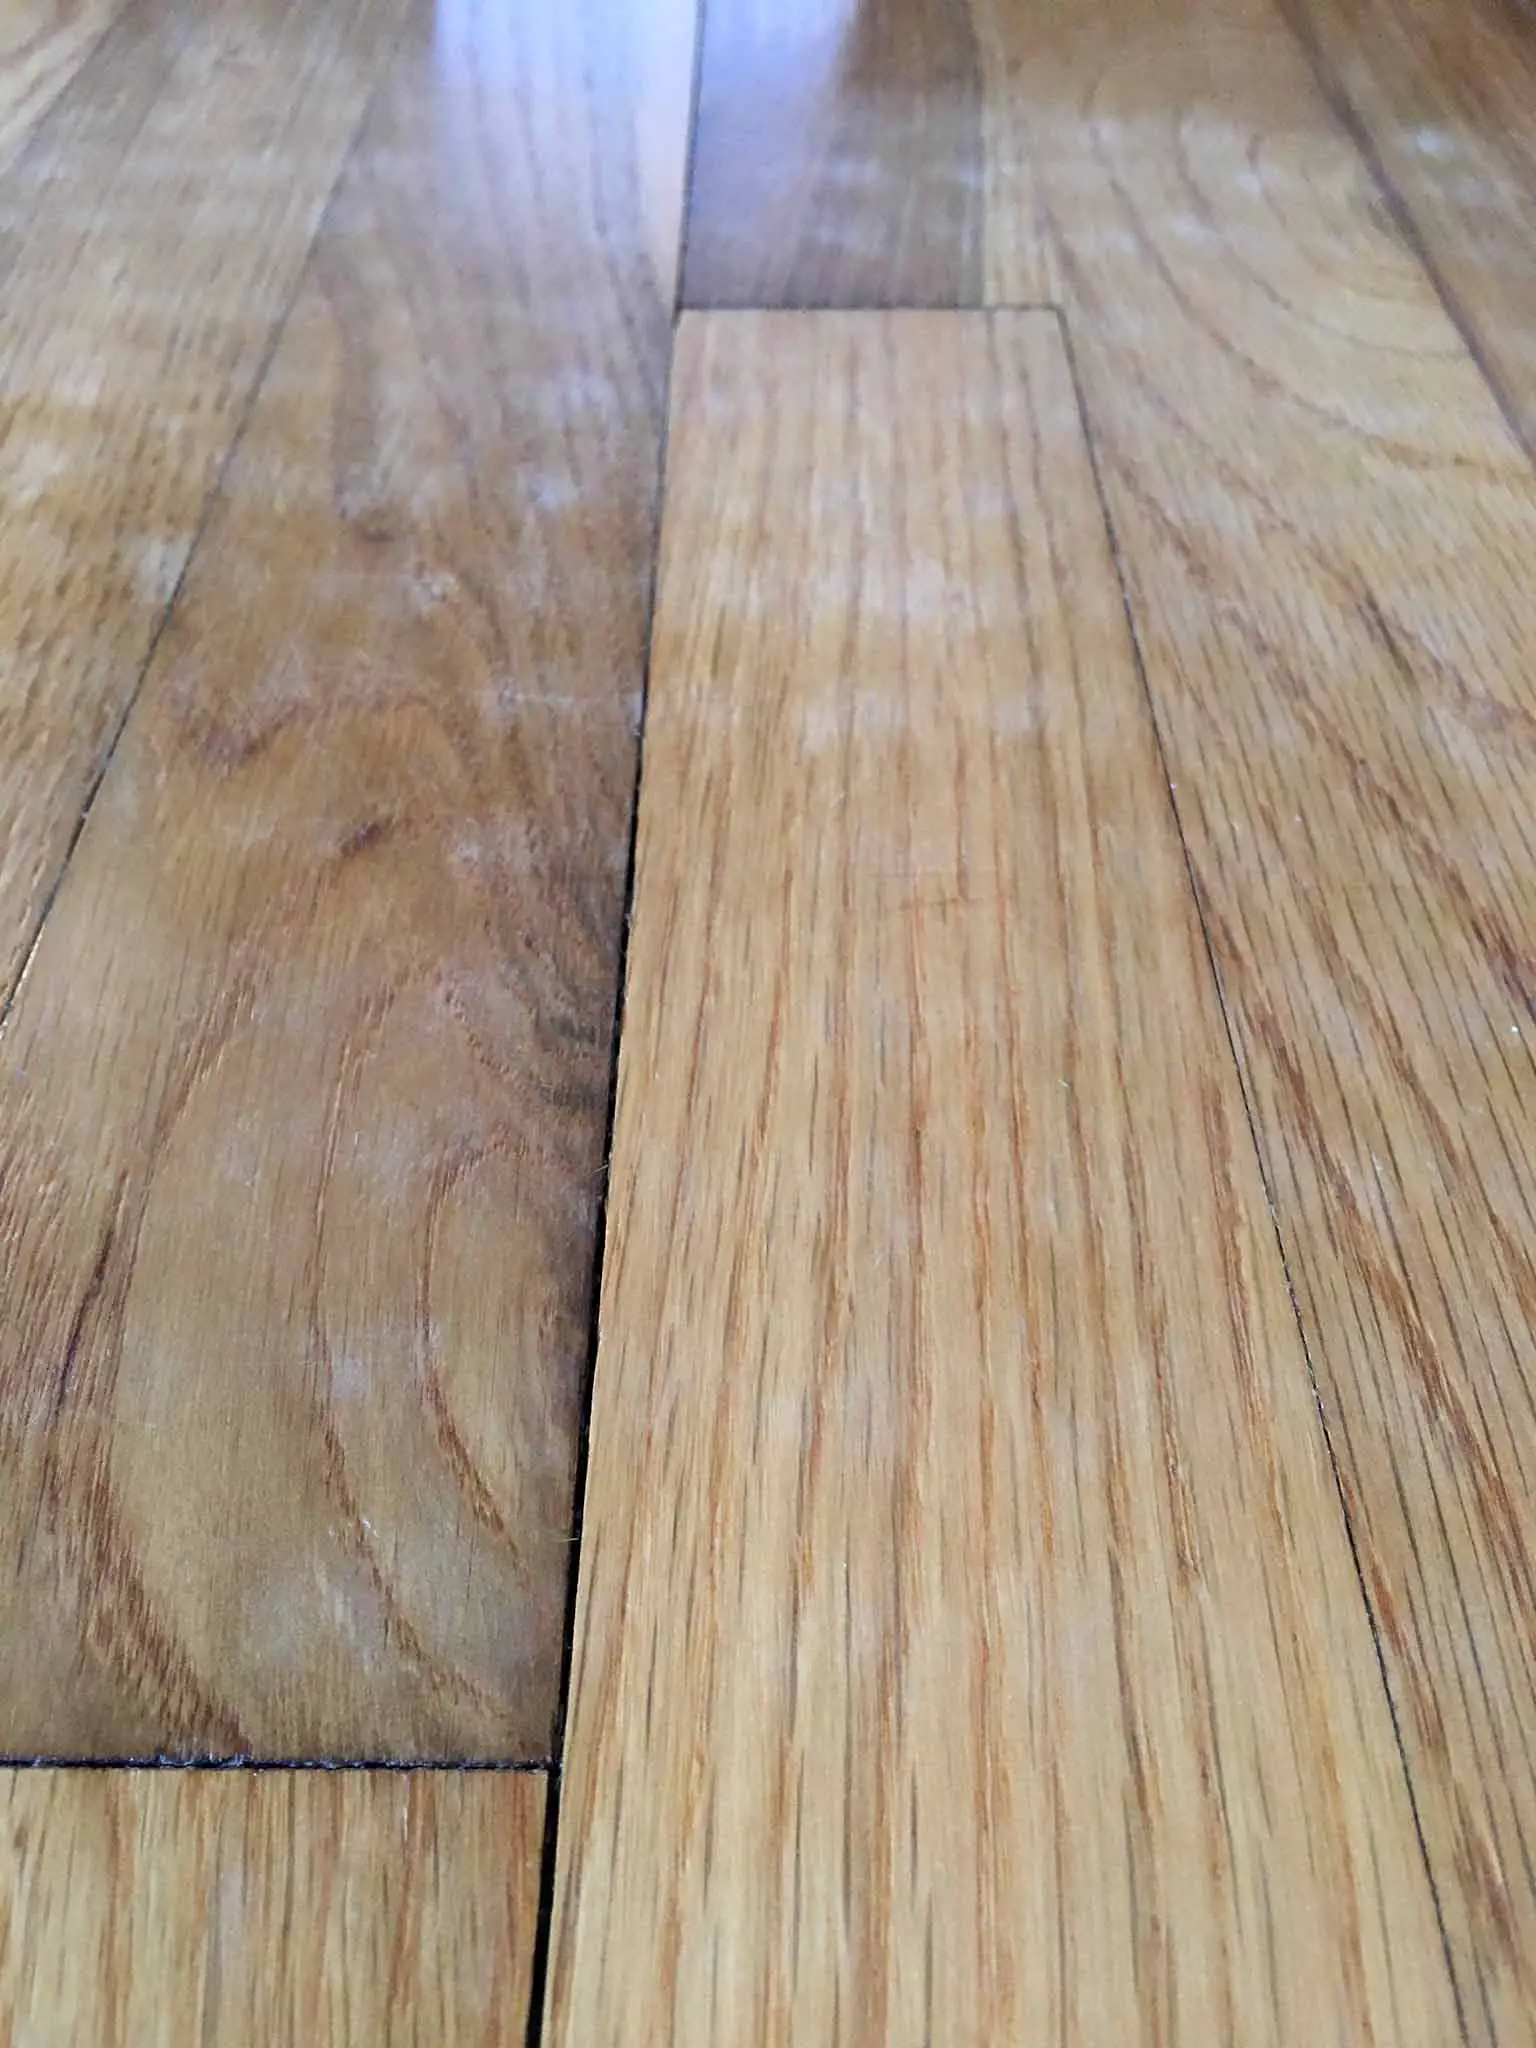 How I Wrecked My Hardwood Floors And, How To Keep A Rug In Place On Hardwood Floors